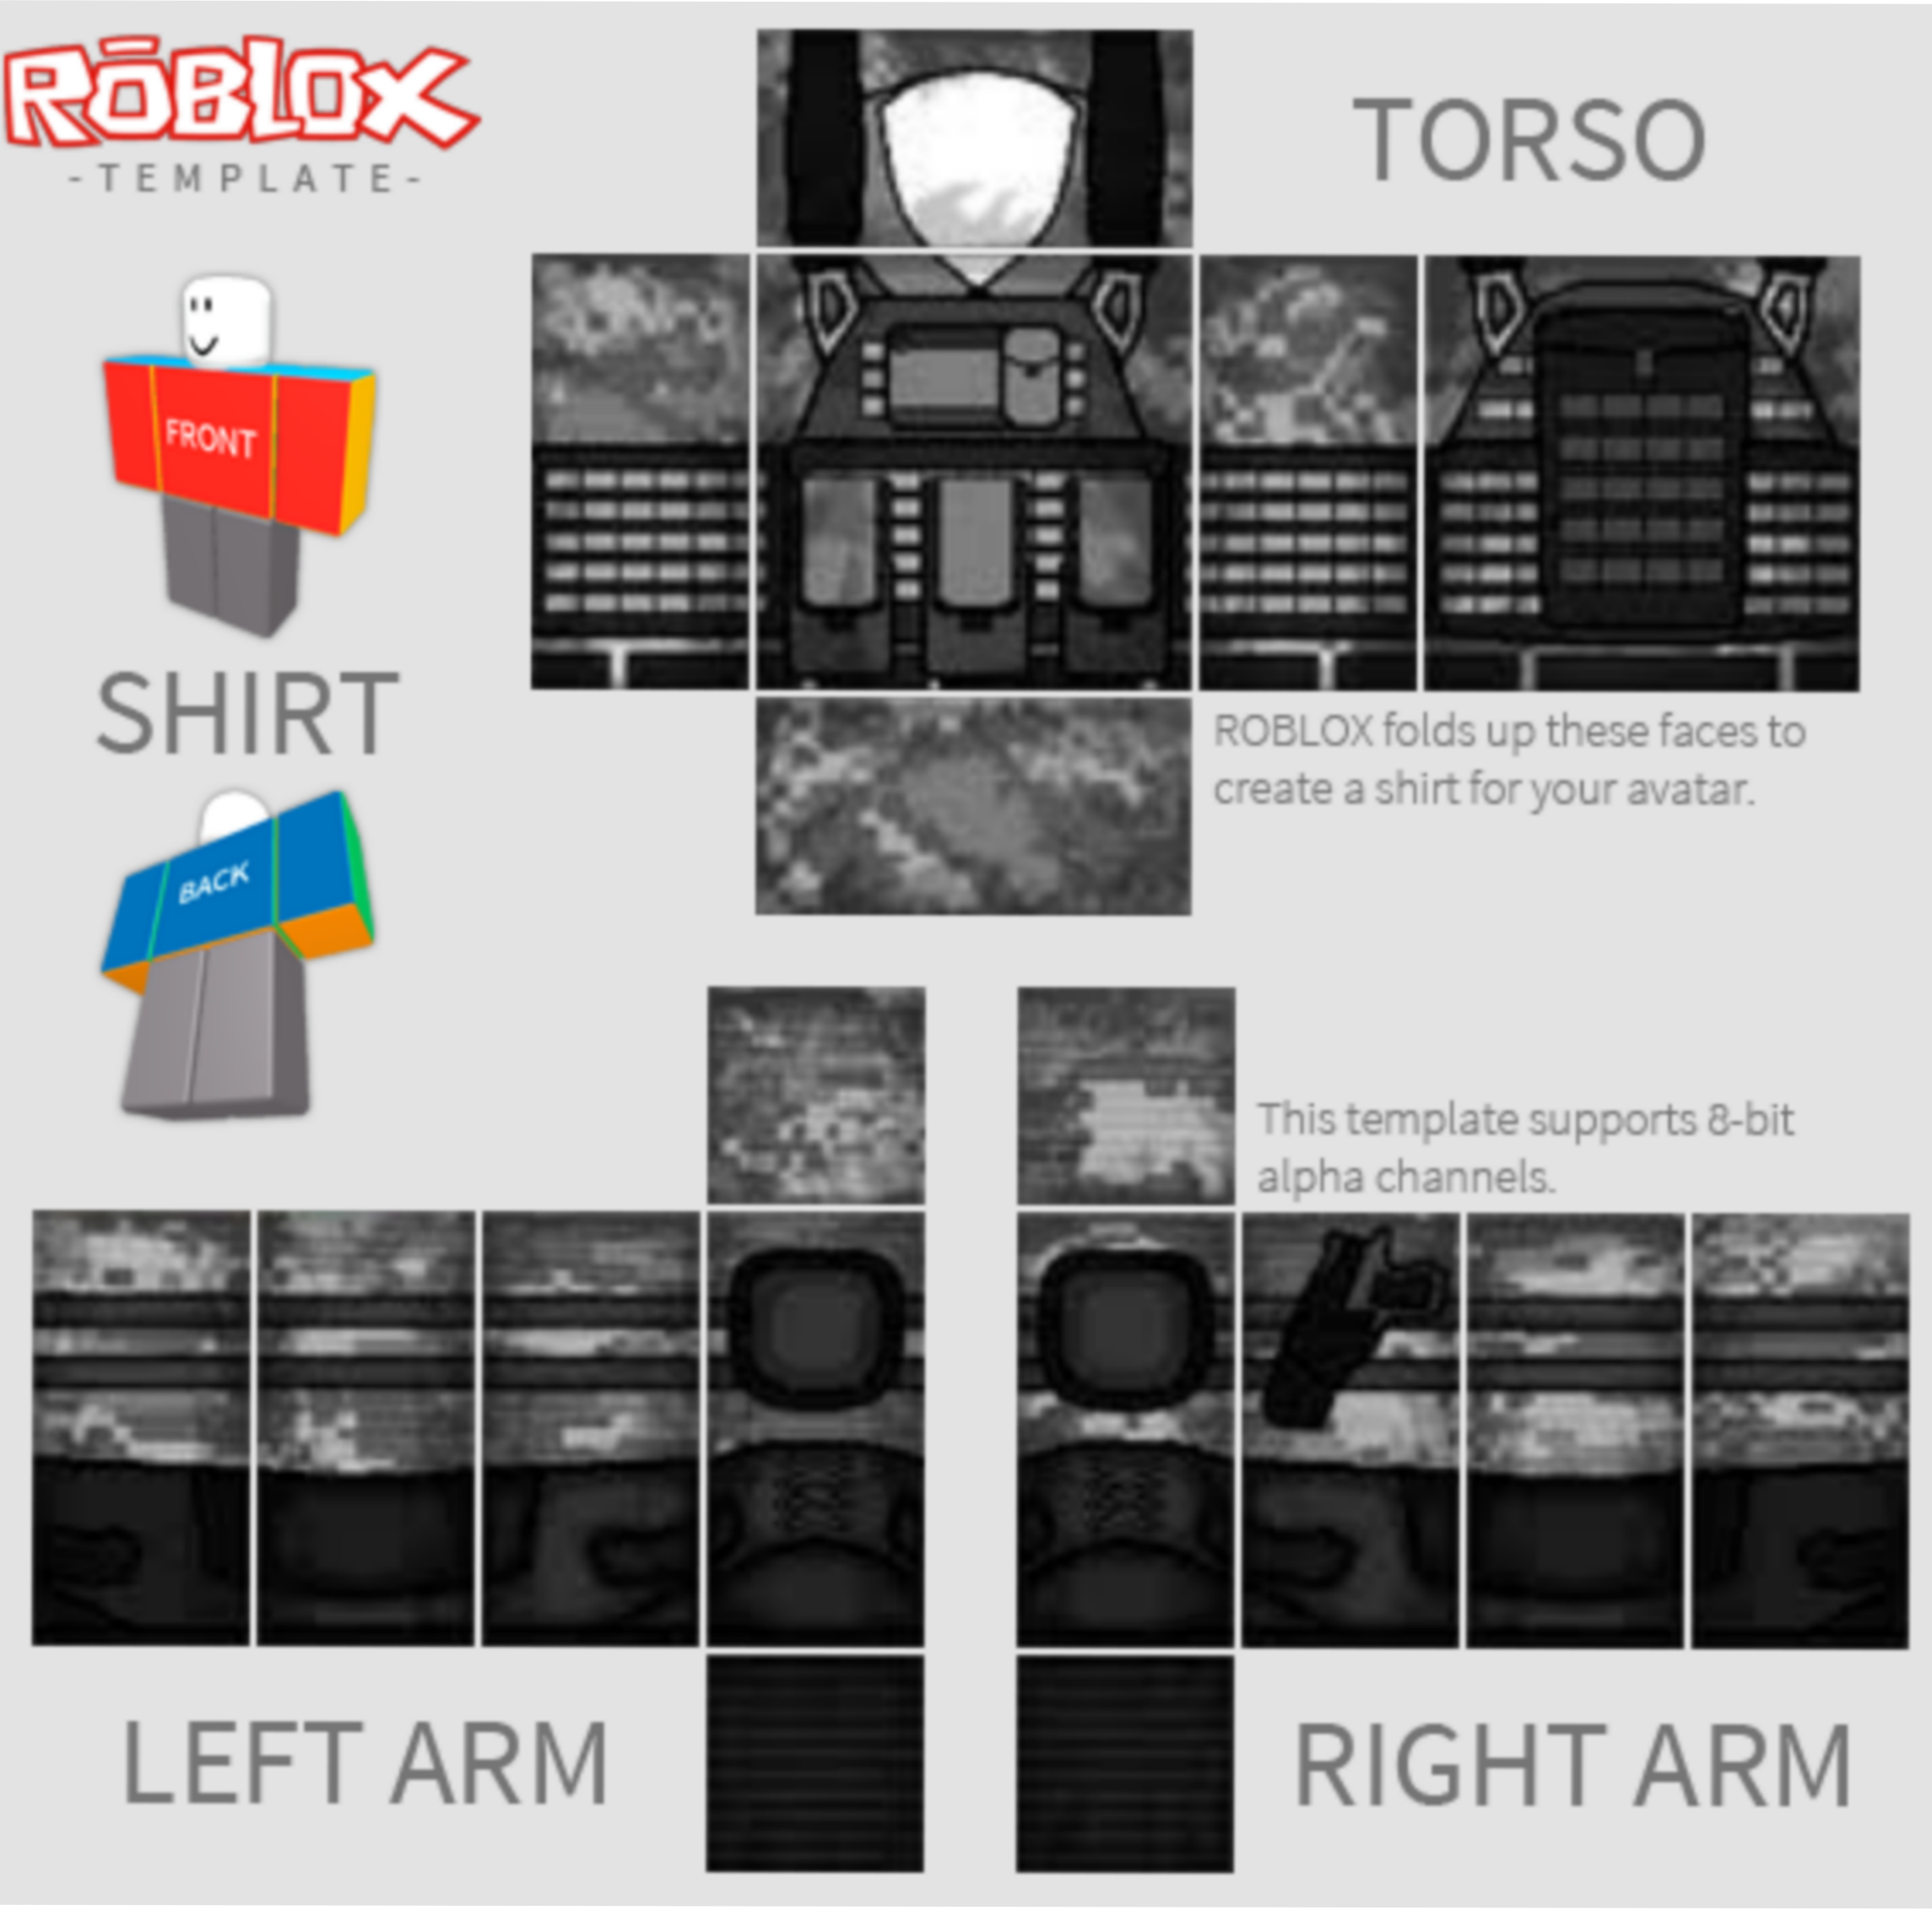 Roblox Template Swat Shirt Image By Guicorreia13795 - awesome roblox shirt template